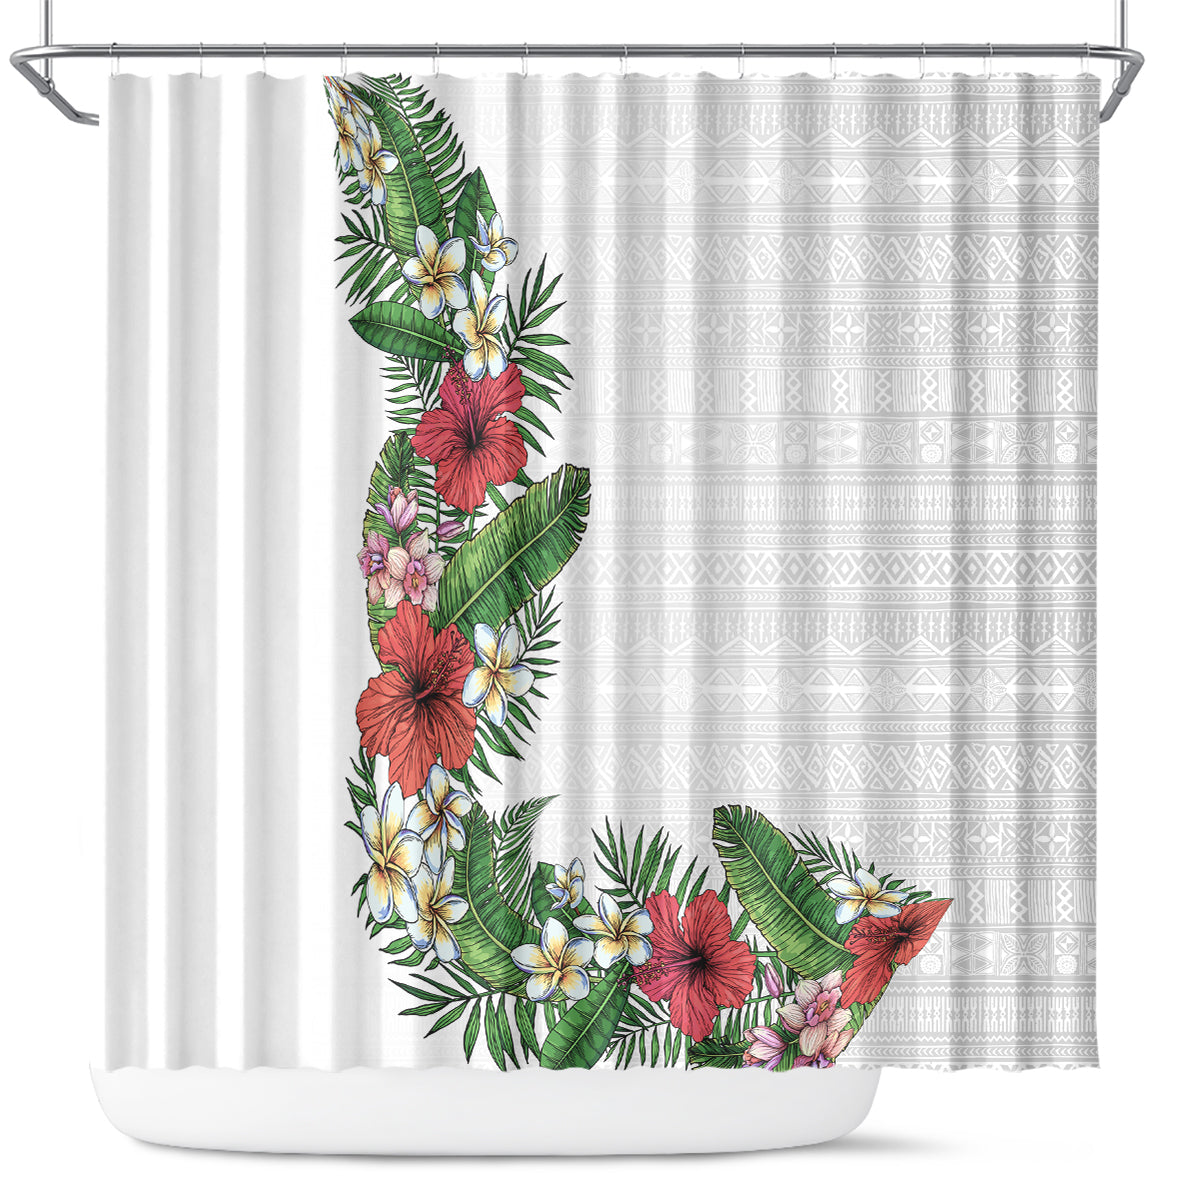 Hawaii Tropical Flowers and Leaves Shower Curtain Tapa Pattern White Mode